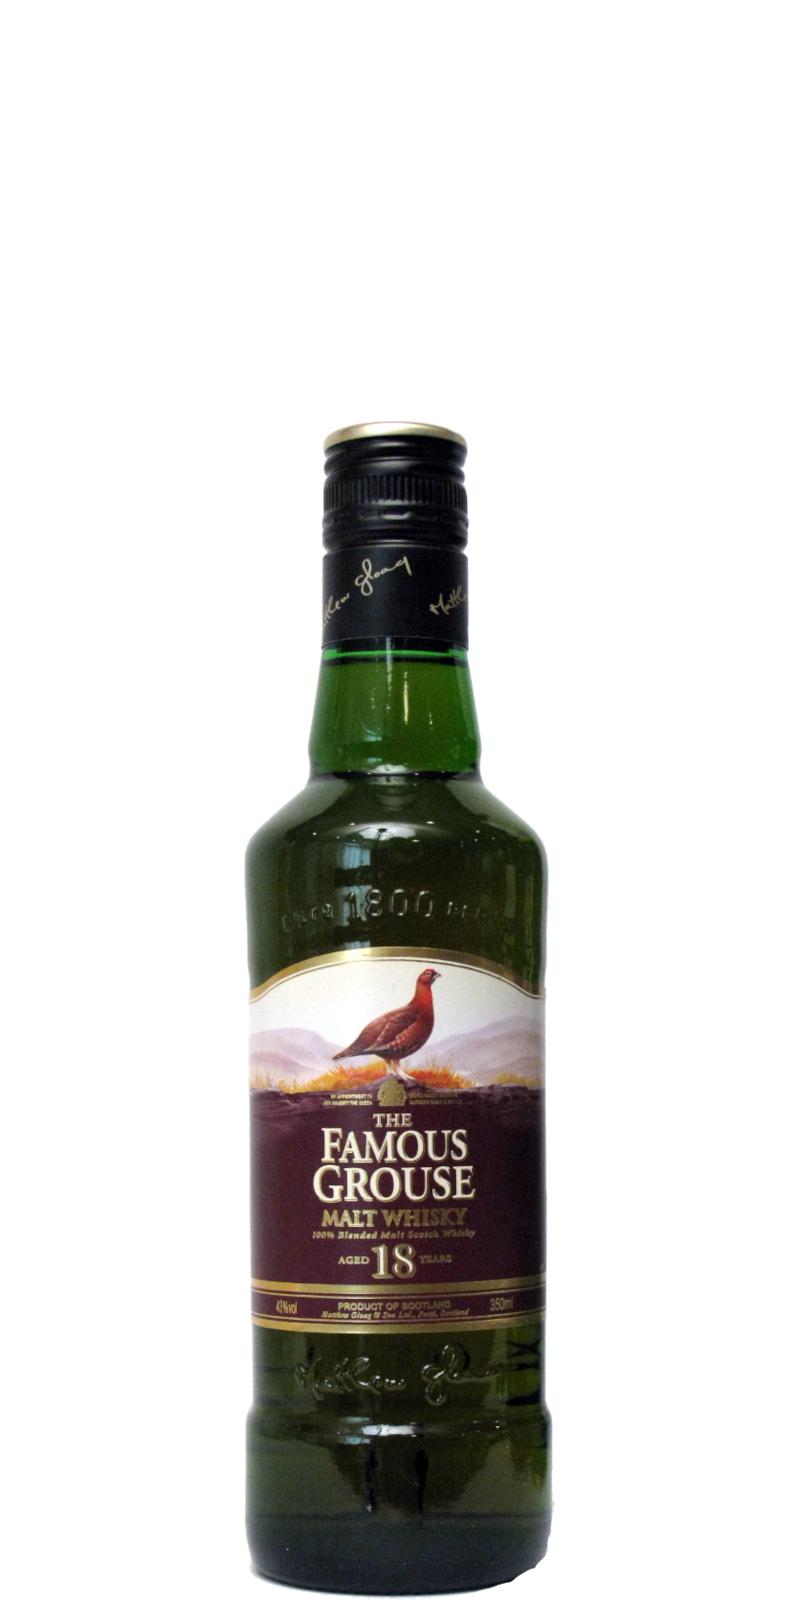 The Famous Grouse 18-year-old